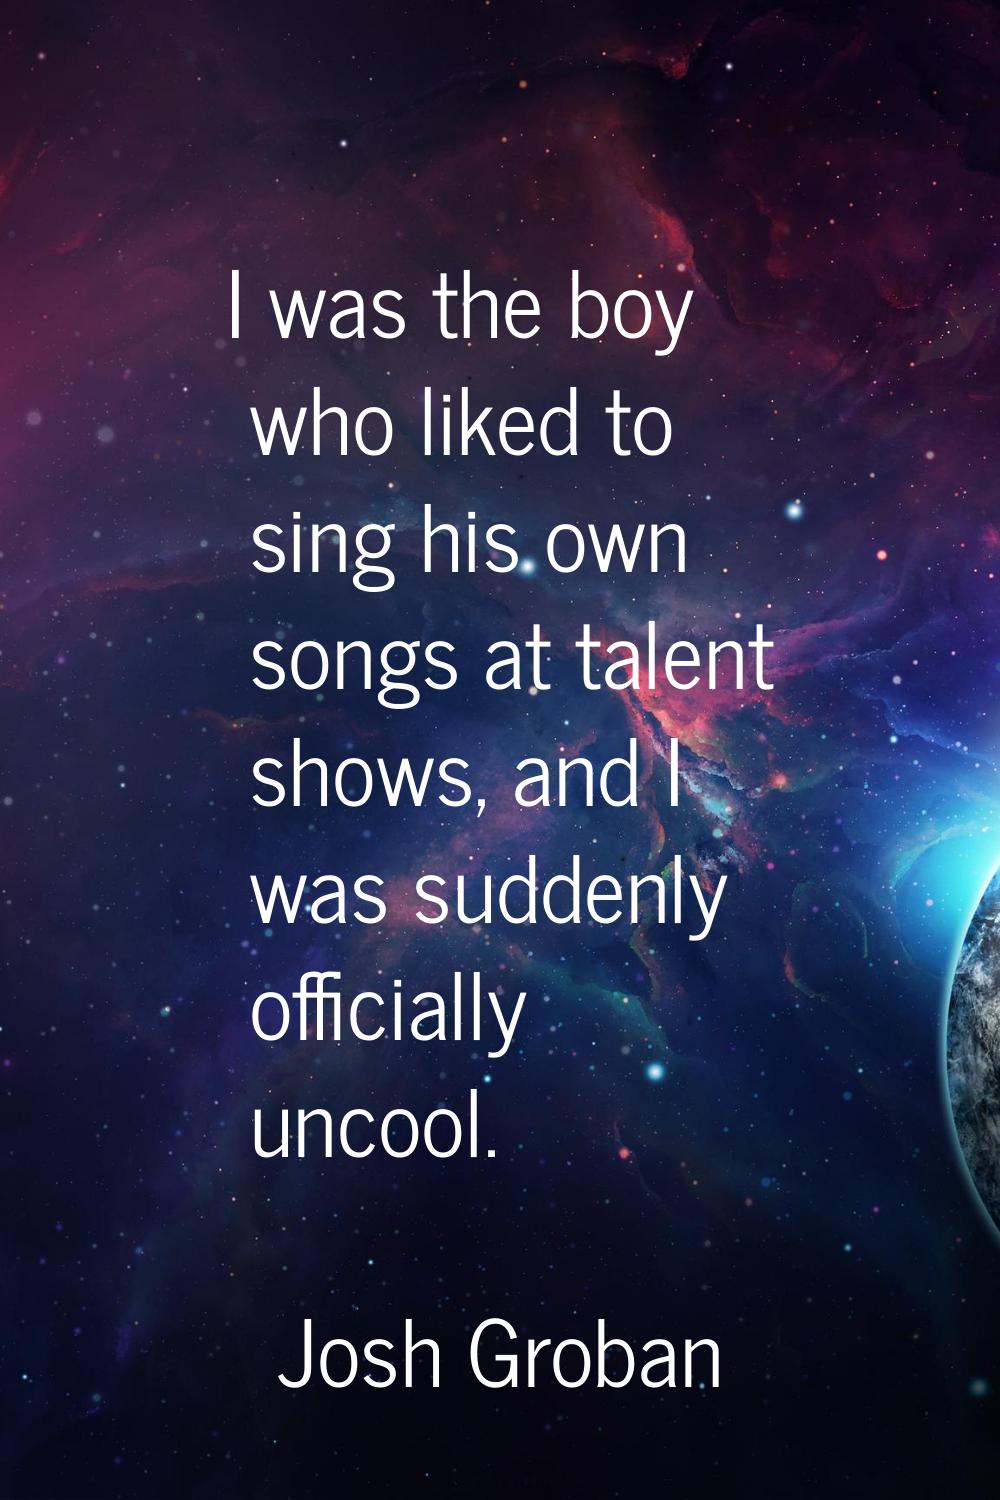 I was the boy who liked to sing his own songs at talent shows, and I was suddenly officially uncool